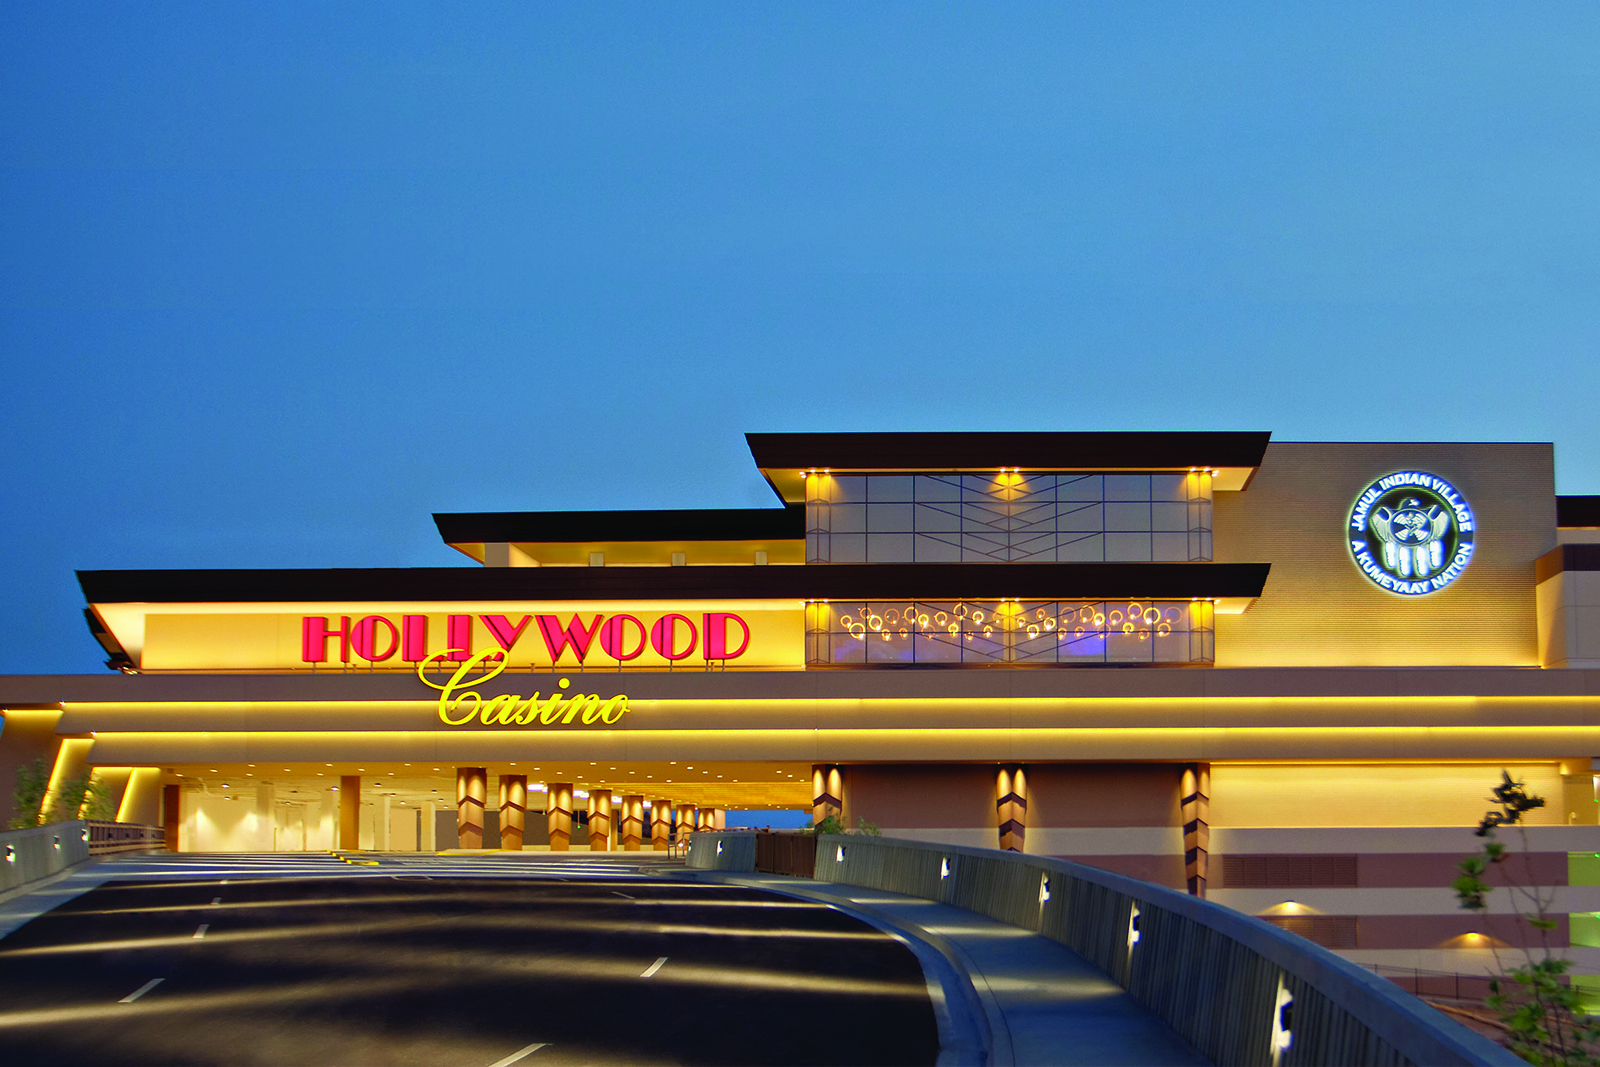 Hollywood Casino Jamul  buffet, restaurant, promotions, poker, jobs, and concerts/events.  Located in San Diego, CA.